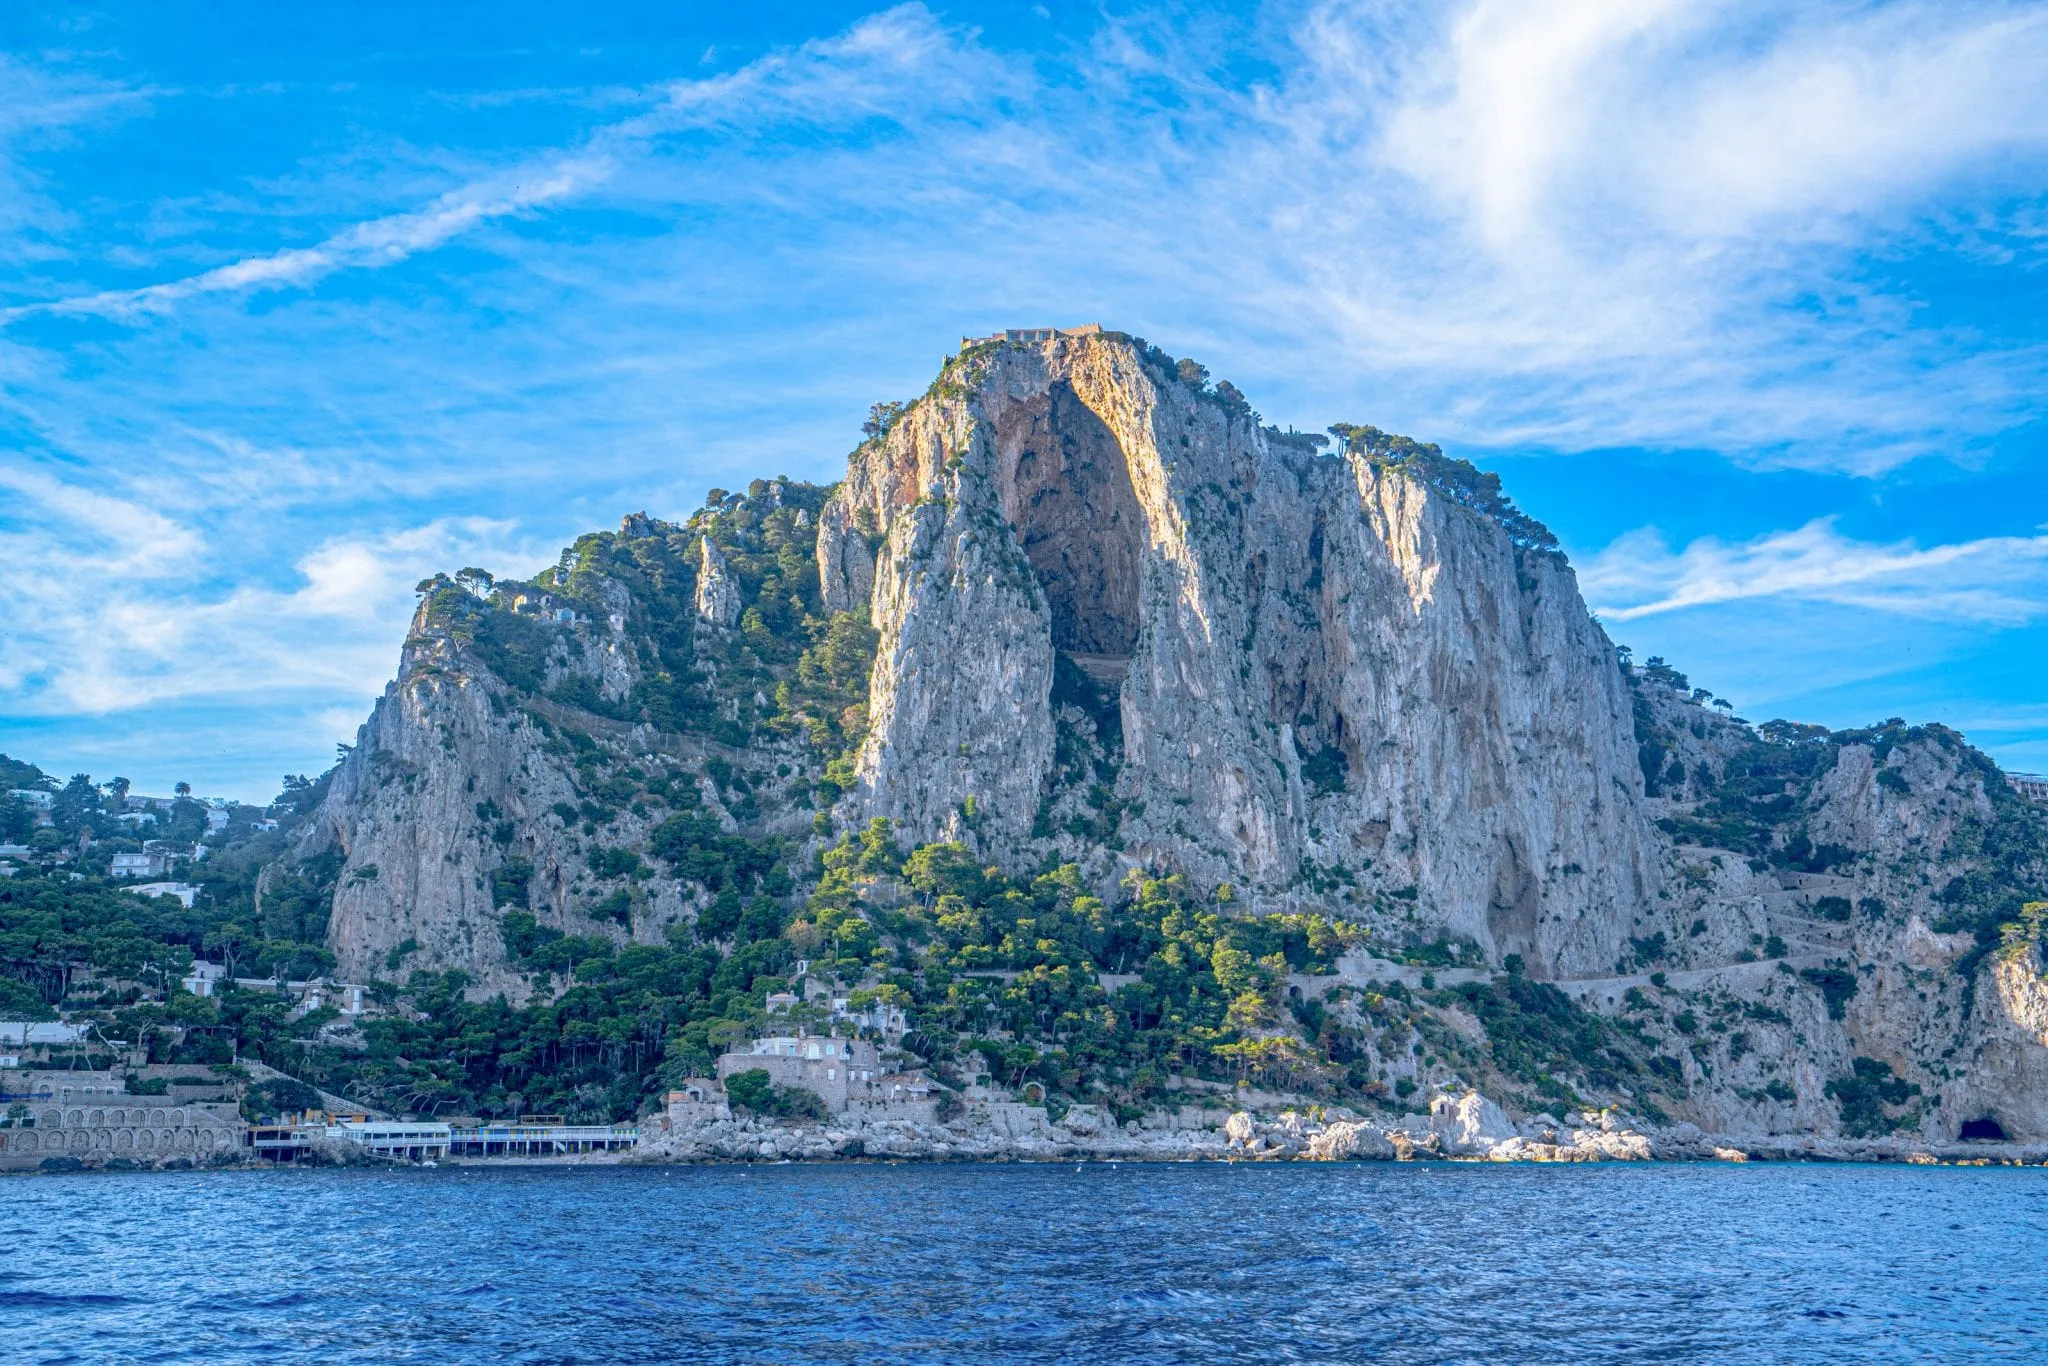 Photo of the island of Capri being approached by boat. You can see the sea at the bottom of the photo. Capri is an iconic destination to keep in mind when putting together your packing list for Europe summer!